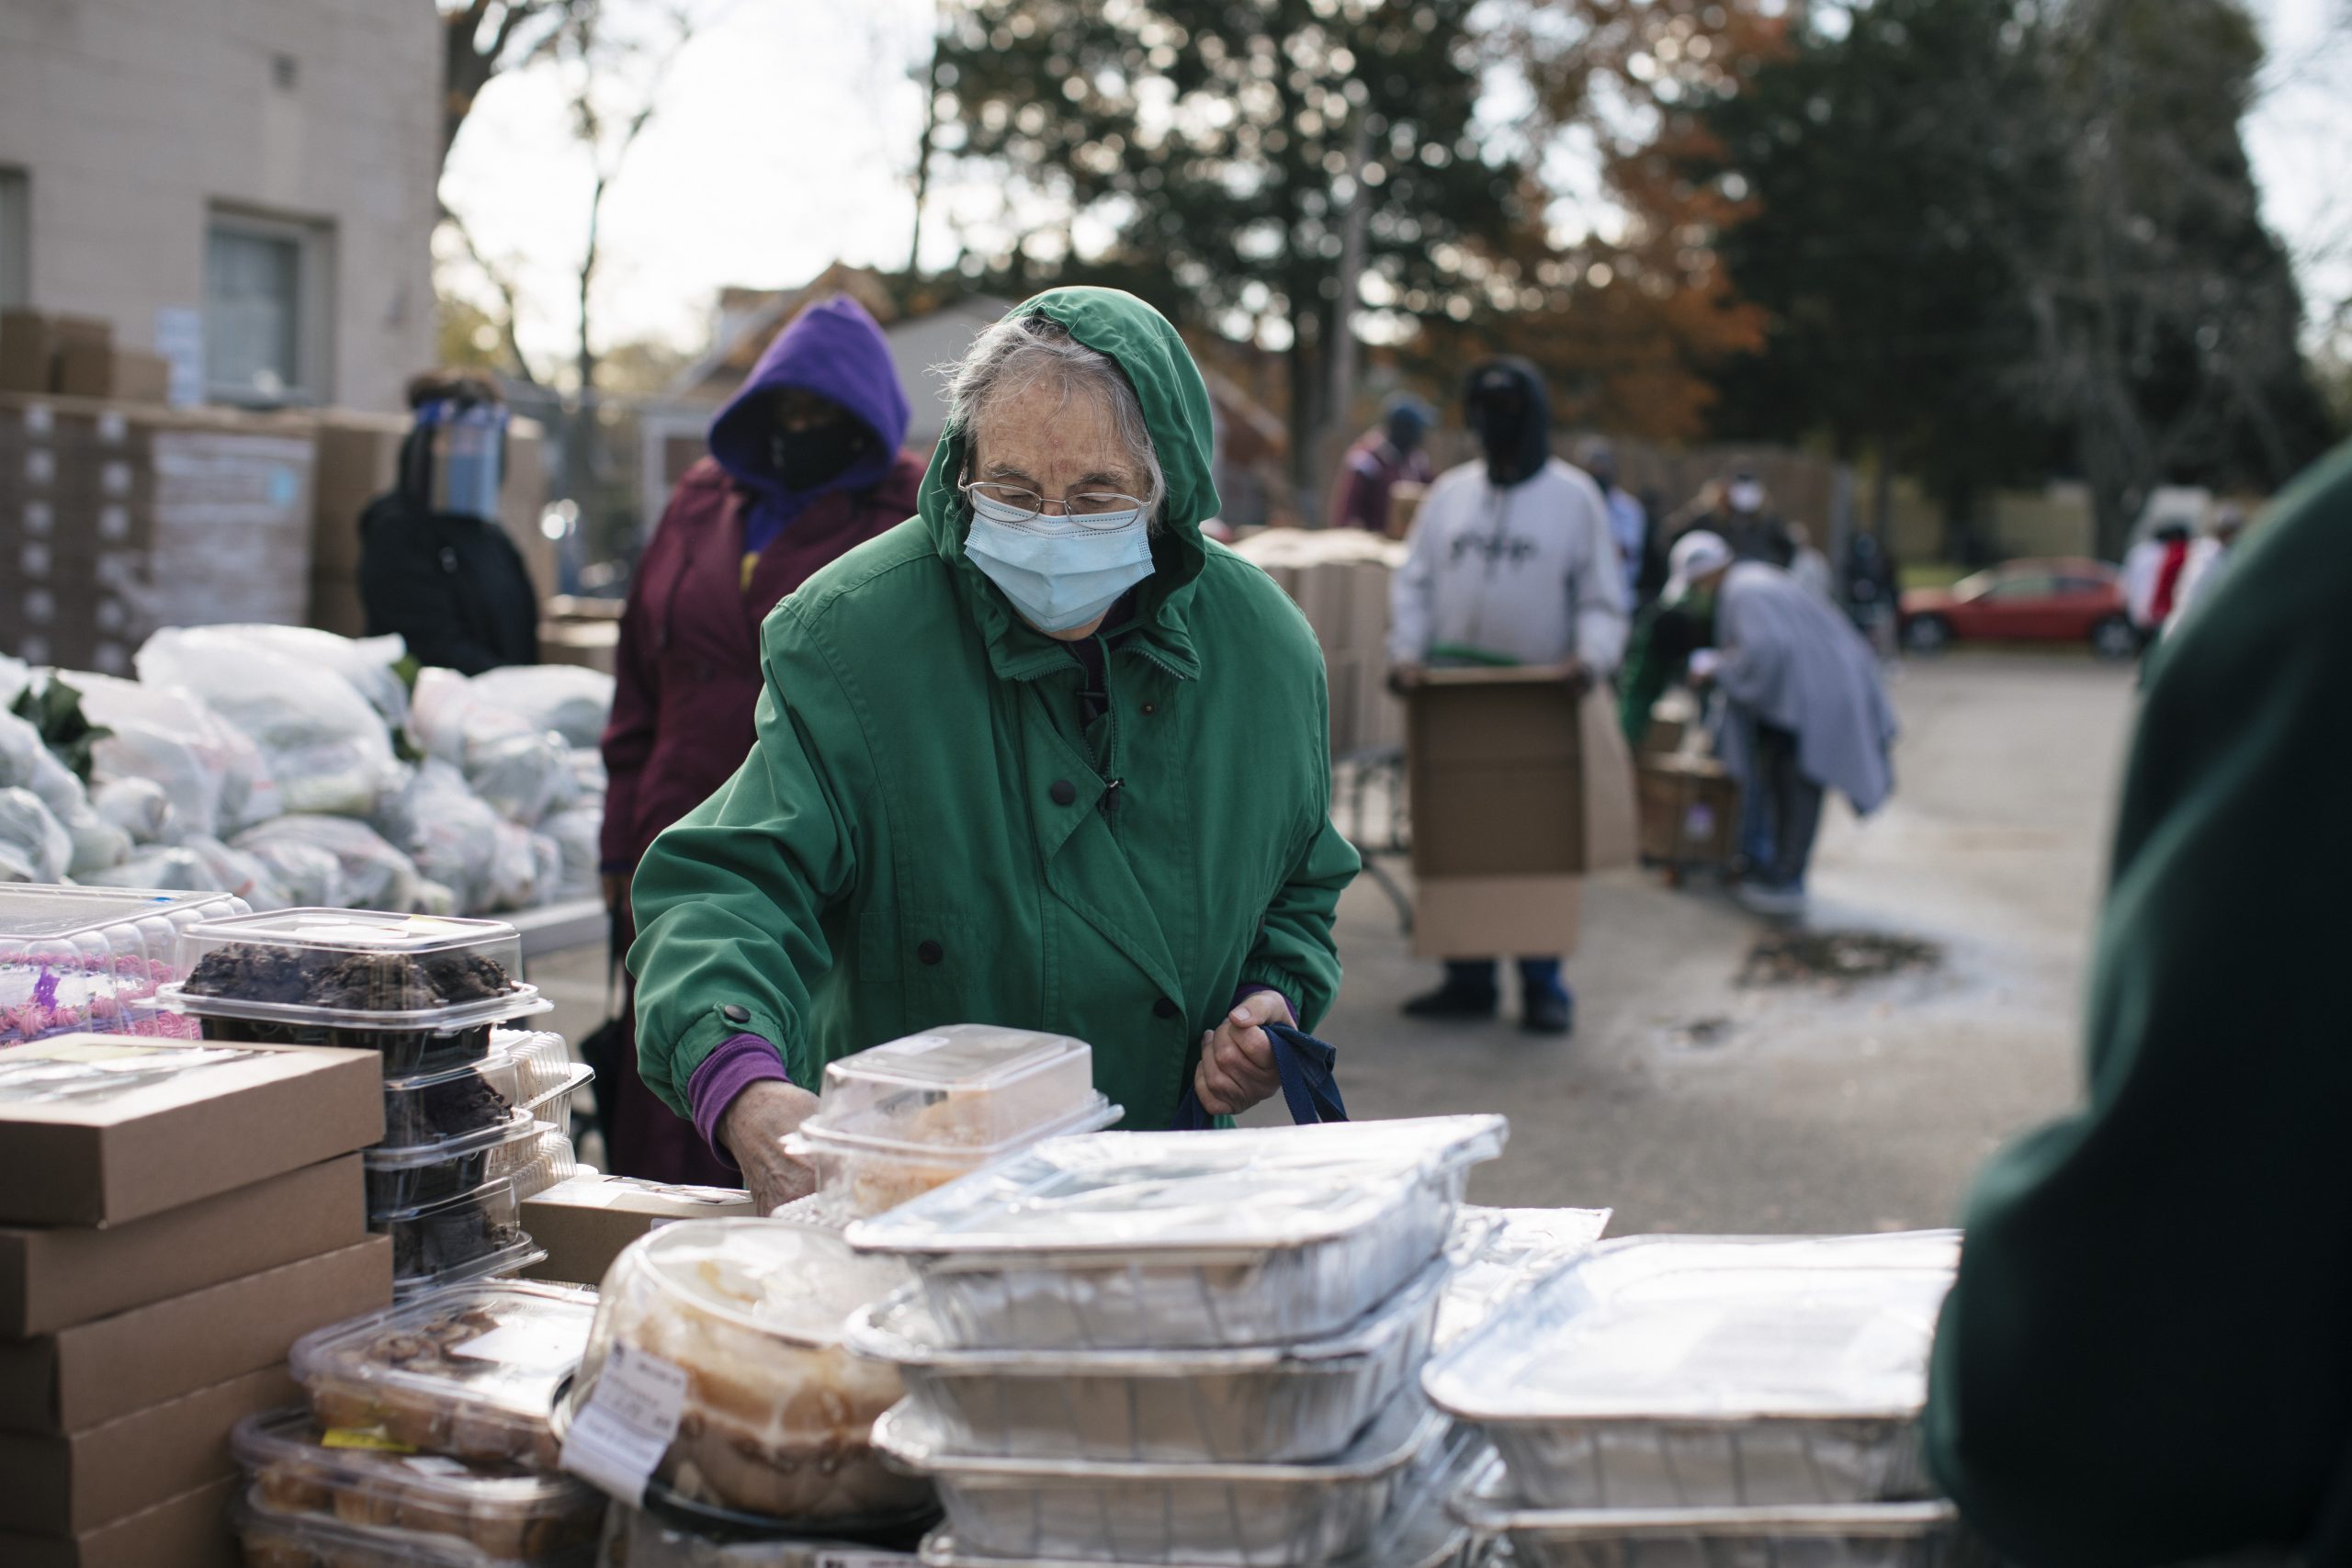 Senior citizen at a food donation area with mask on